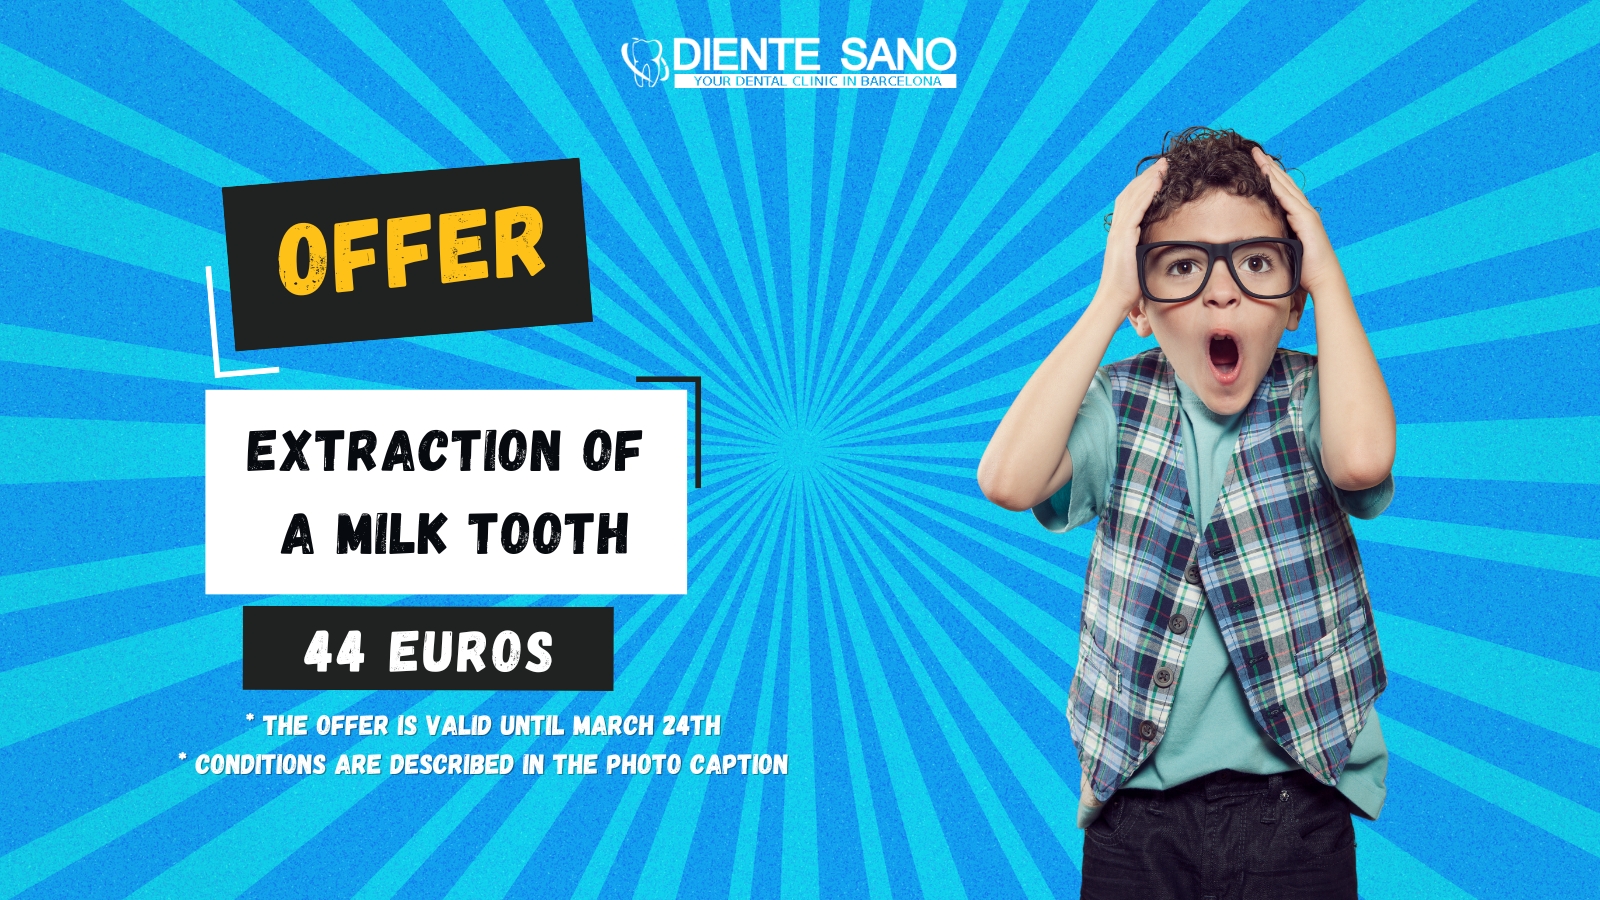 Extraction of a milk tooth - for 44 euros!   Give your child a smile of health and happiness with exclusive offers from Diente Sano Dental Clinic in Barcelona! Understanding the importance of caring for baby teeth, we offer a special promotion aimed at caring for and protecting your child's smile.